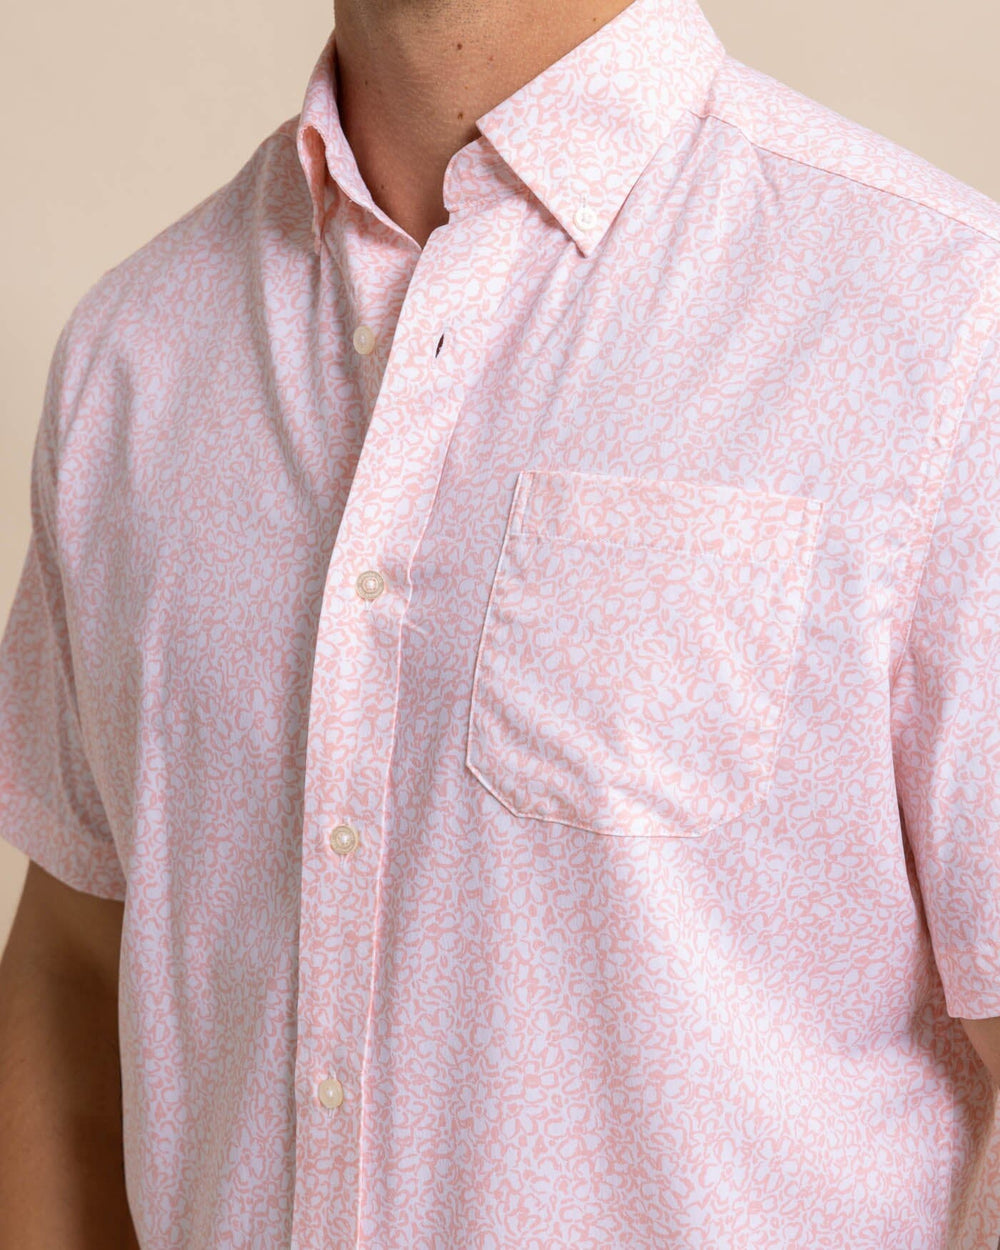 The detail view of the Southern Tide brrr Intercoastal That Floral Feeling Short Sleeve Sport Shirt by Southern Tide - Apricot Blush Coral